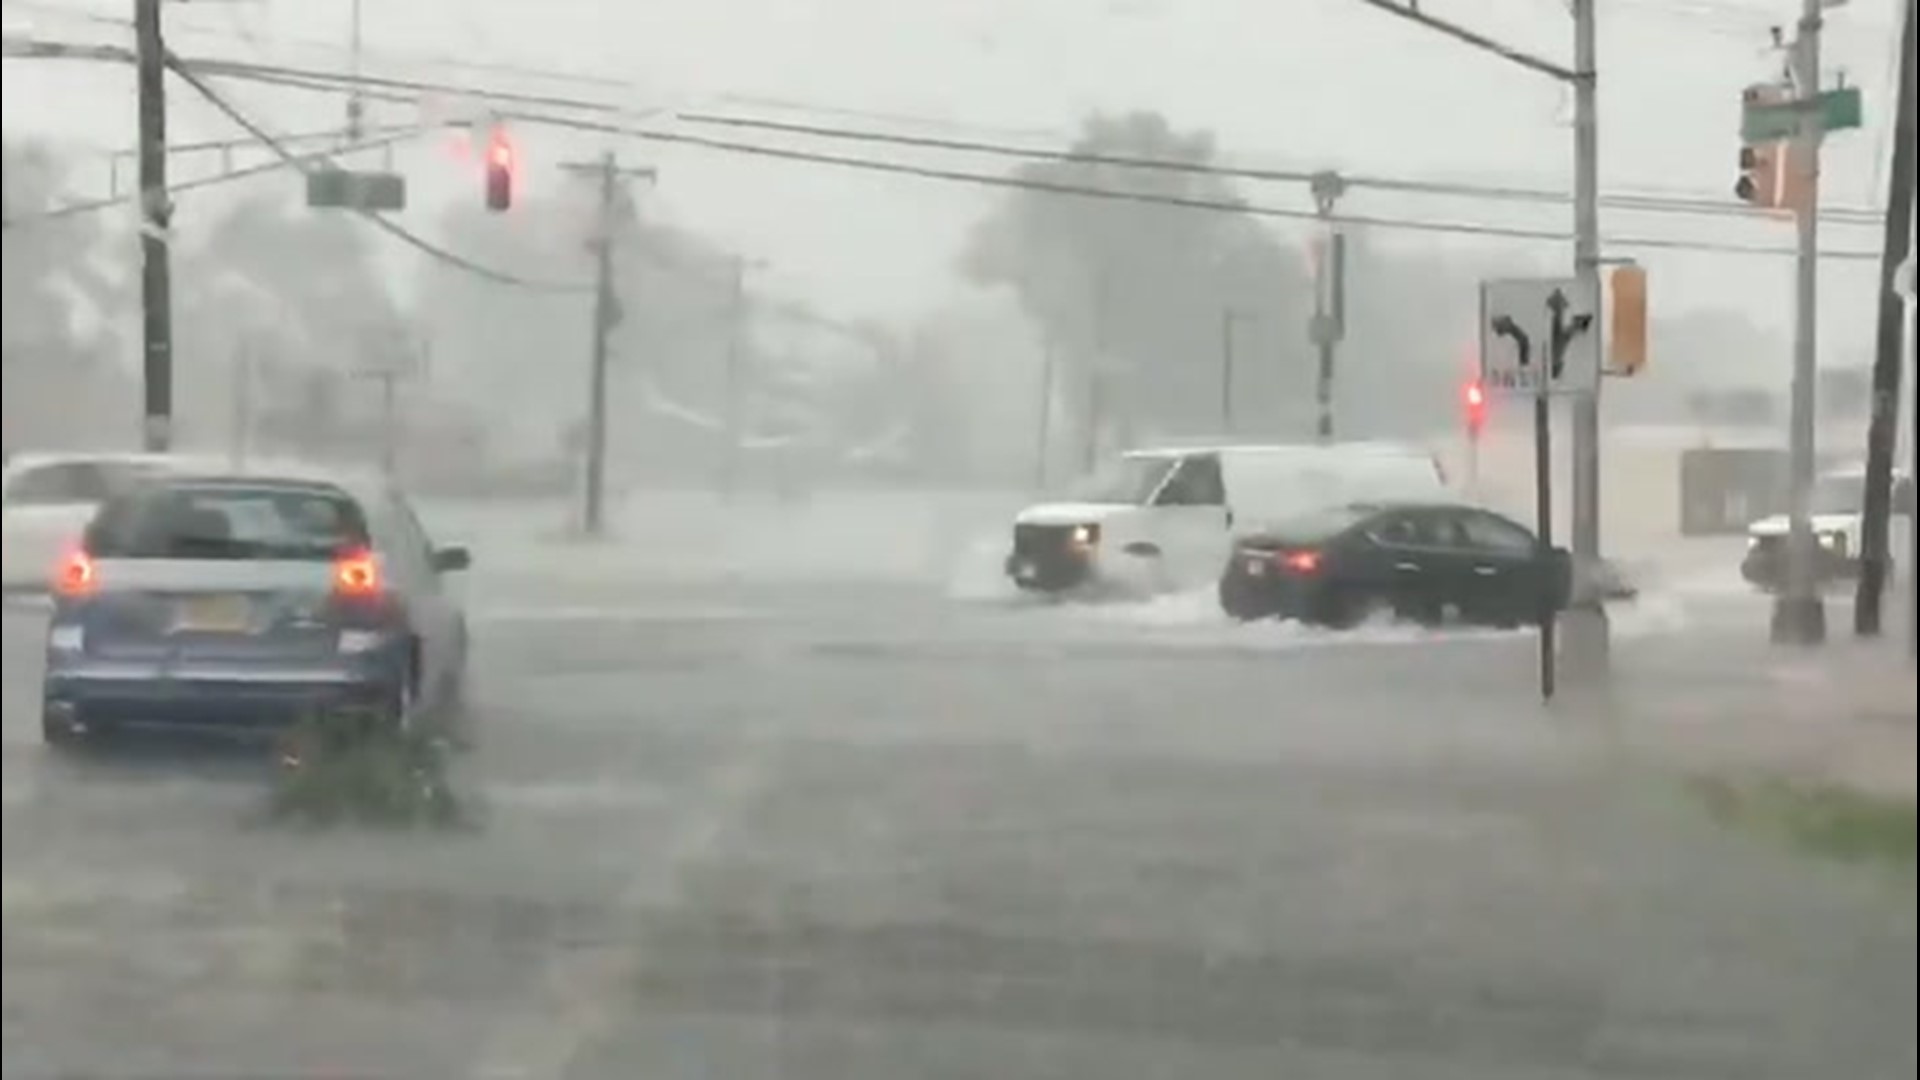 Heavy rain on July 6 caused streets to flood in Hamilton, New Jersey. Large hail was also reported in the storm.